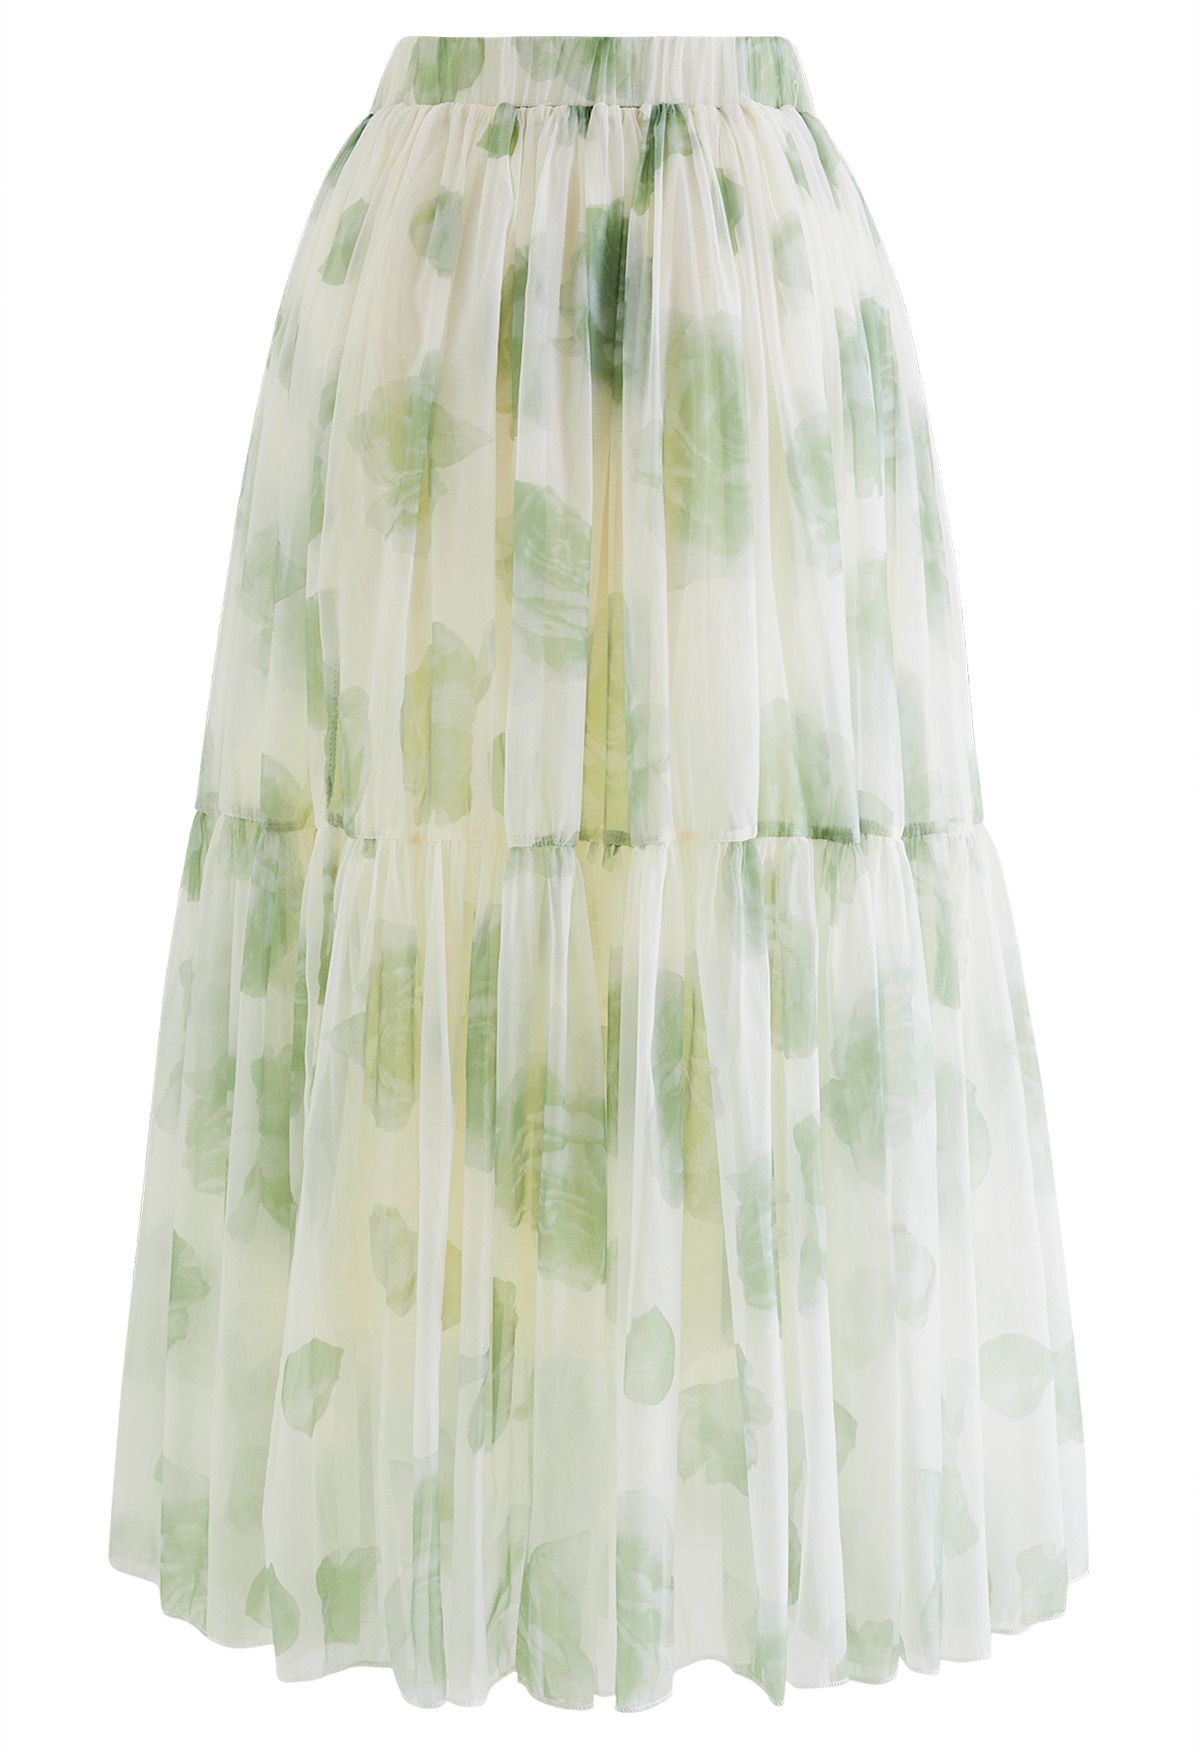 Can't Let Go Sheer Maxi Skirt in Green Rose